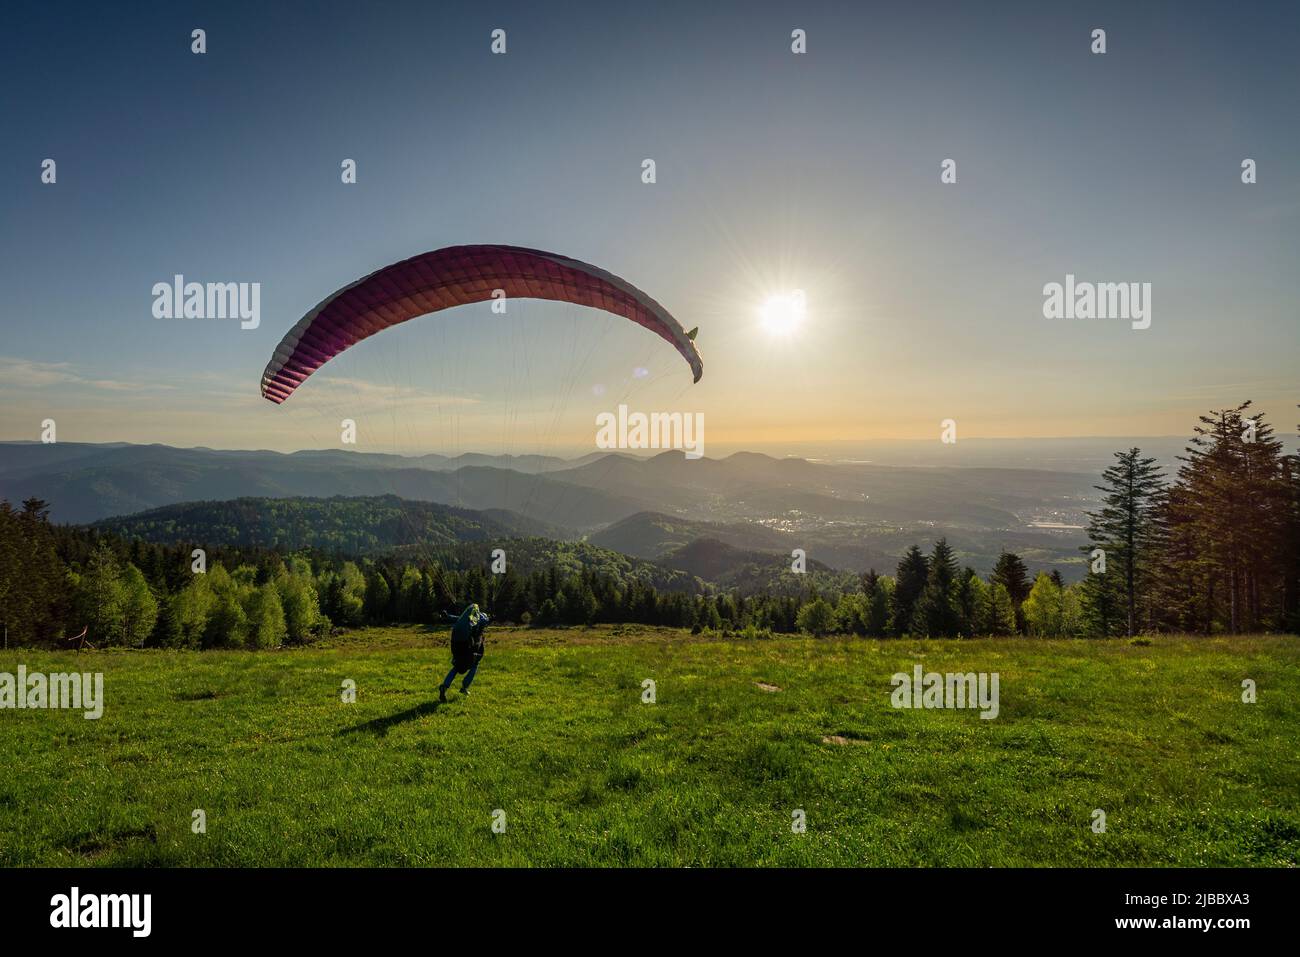 Paraglider at the take-off into the sunset at the Devil's mill launch site in the Murg valley in the Black Forest mountains, Germany Stock Photo